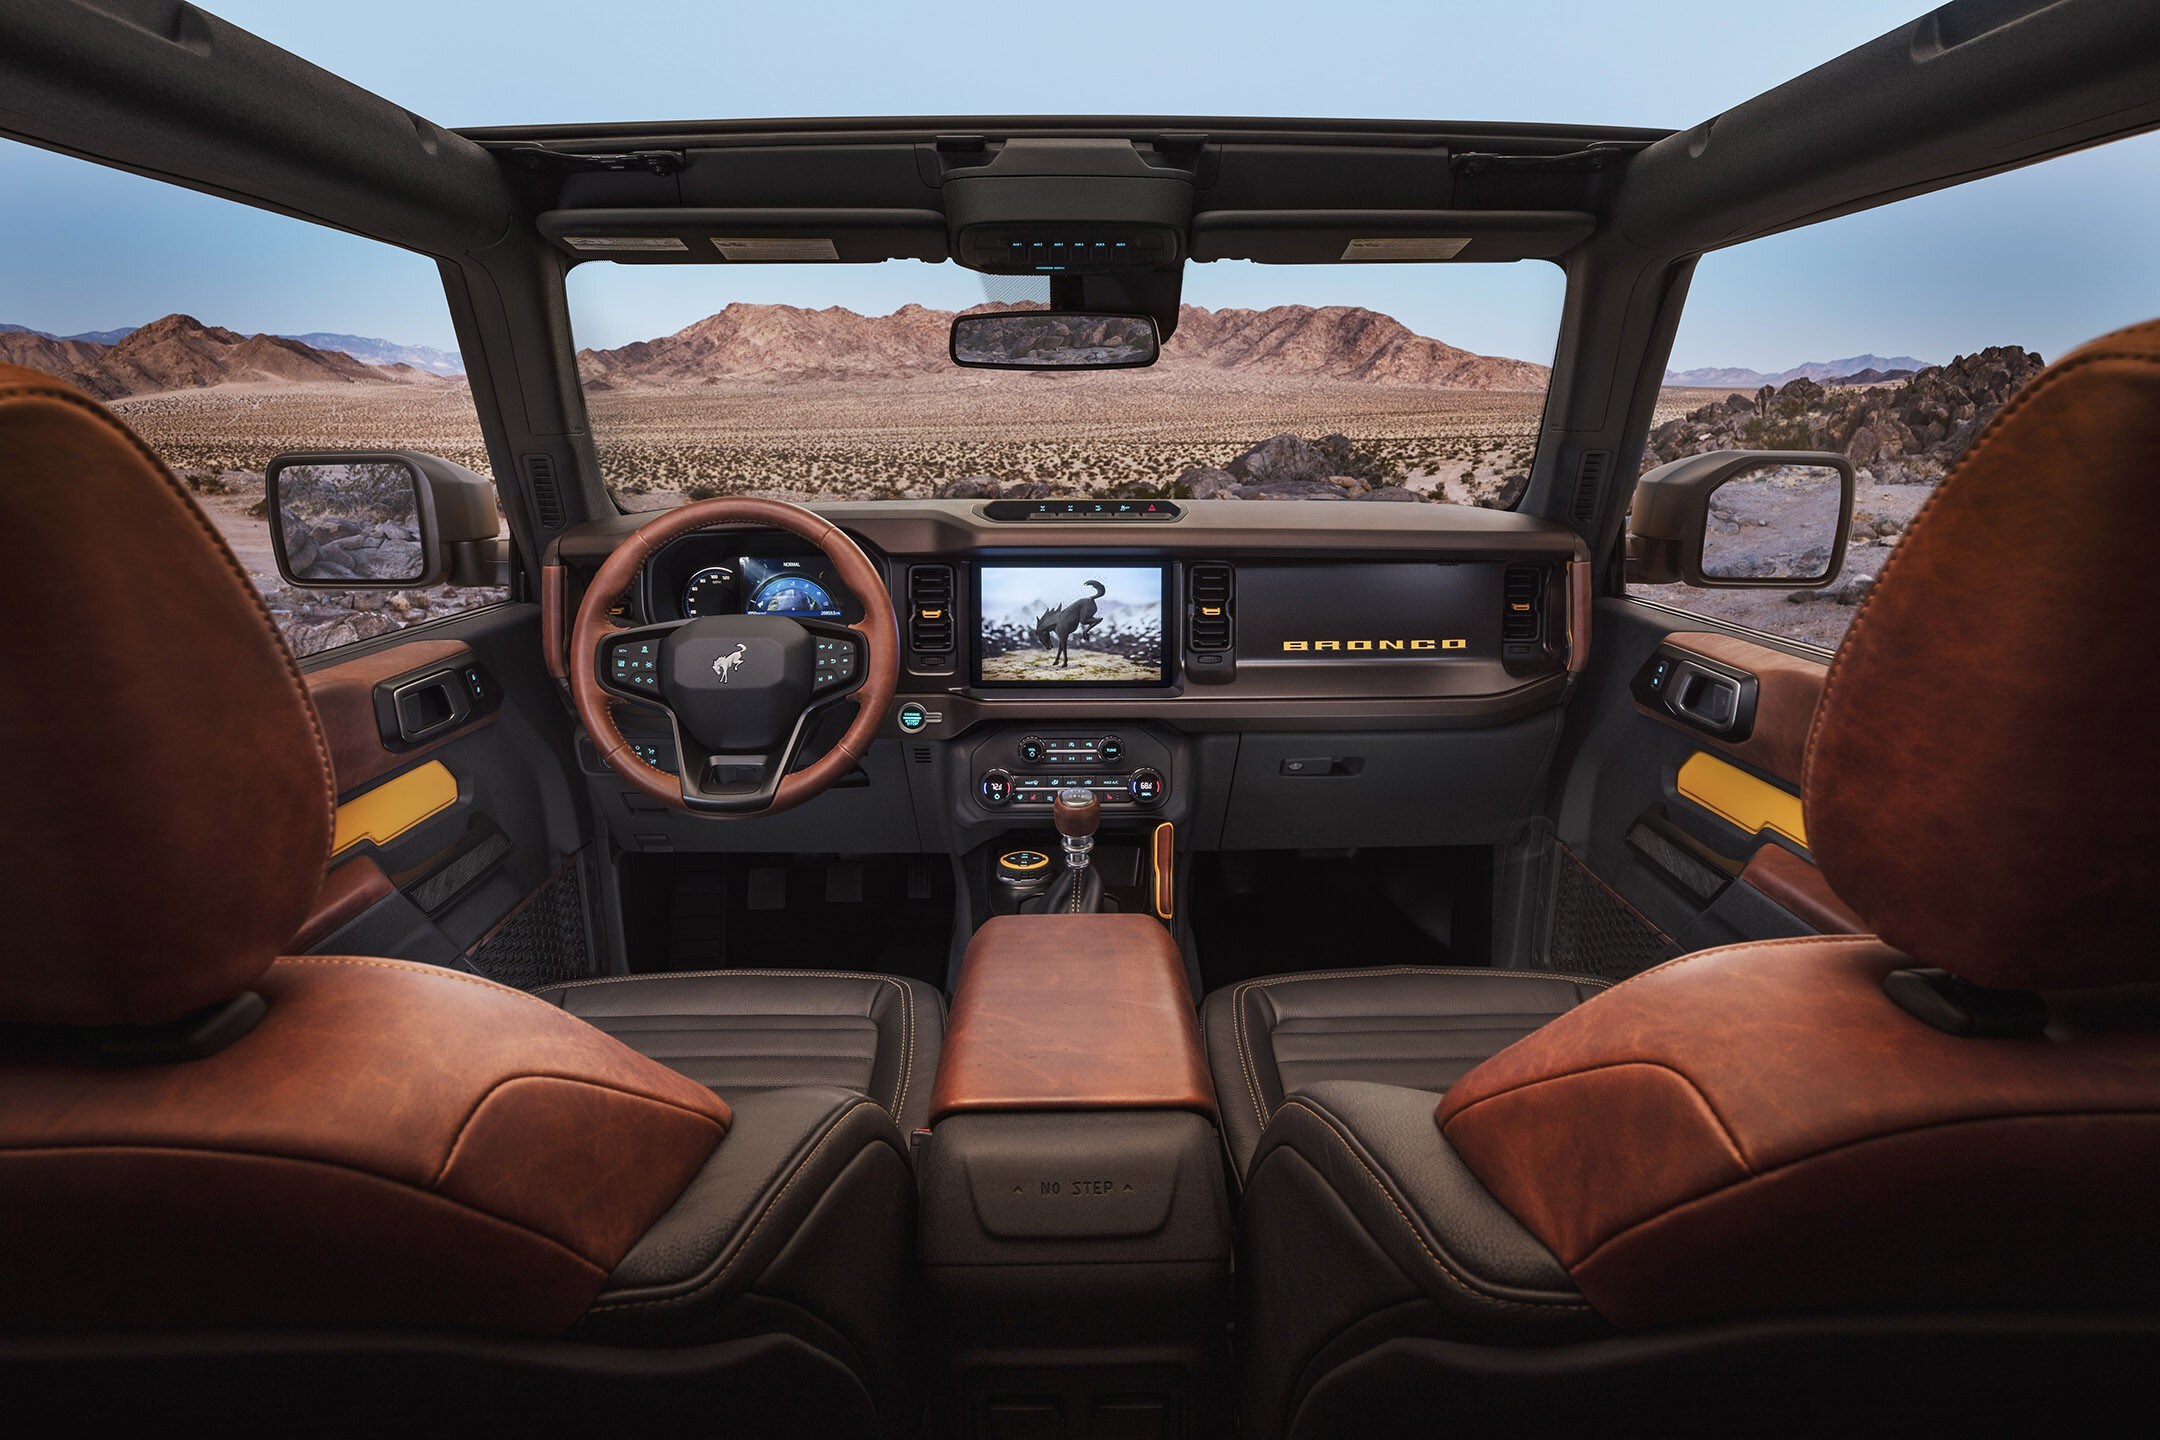 The Ford Bronco has one of the best interiors out there, pictured with tan leather.